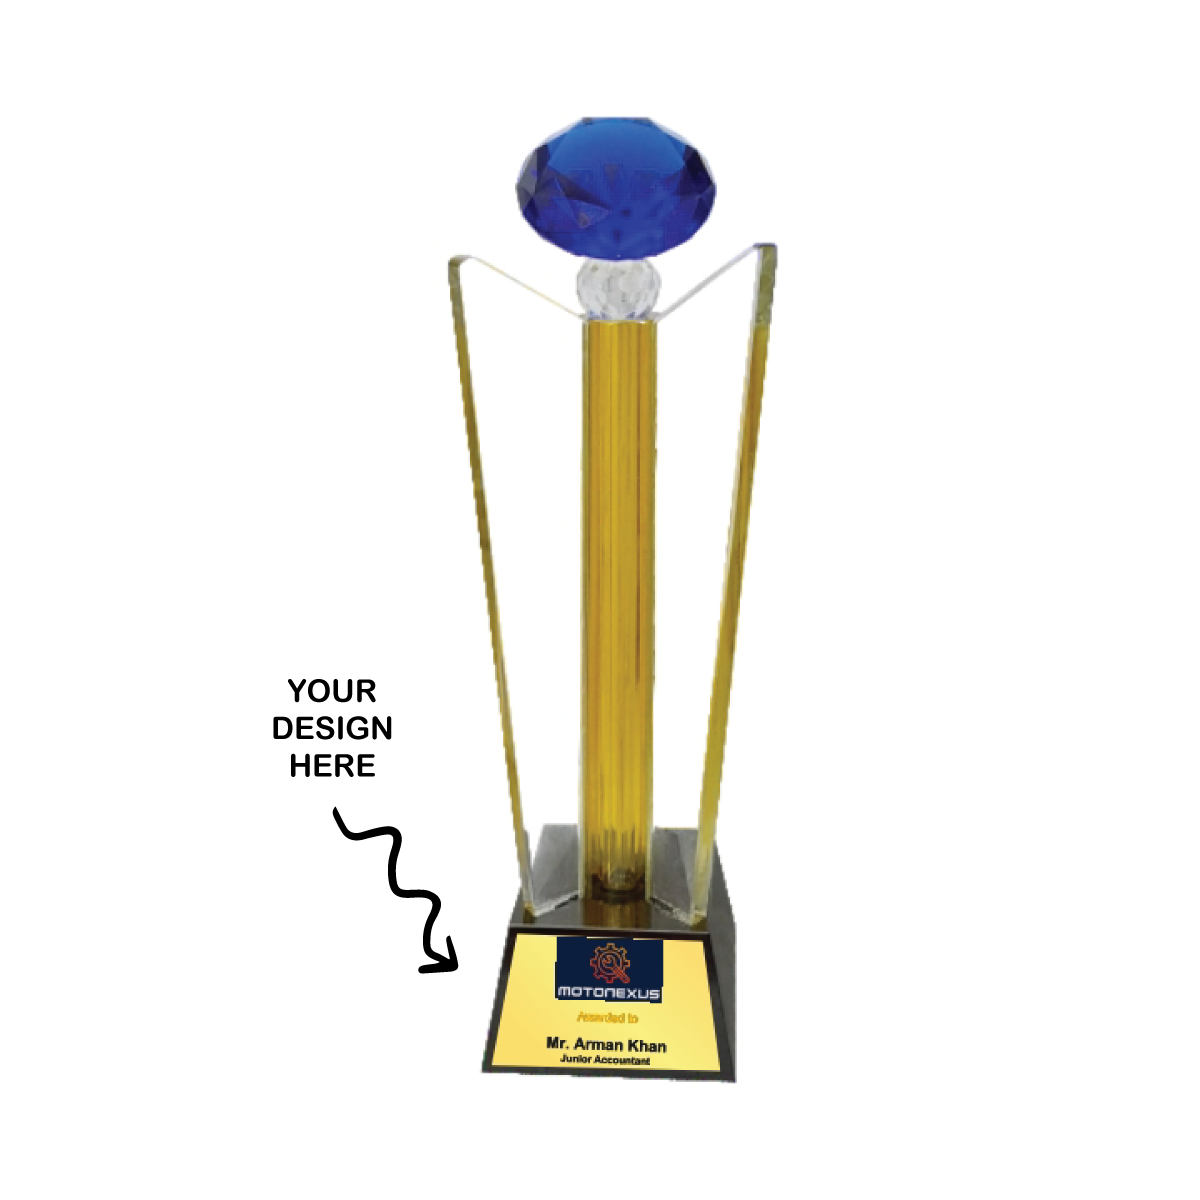 Personalized Optic Crystal Award Trophy - For Employee Recognition, Corporate Gifting, Award Shows, Sports Event, Competition, Students Reward - MA532